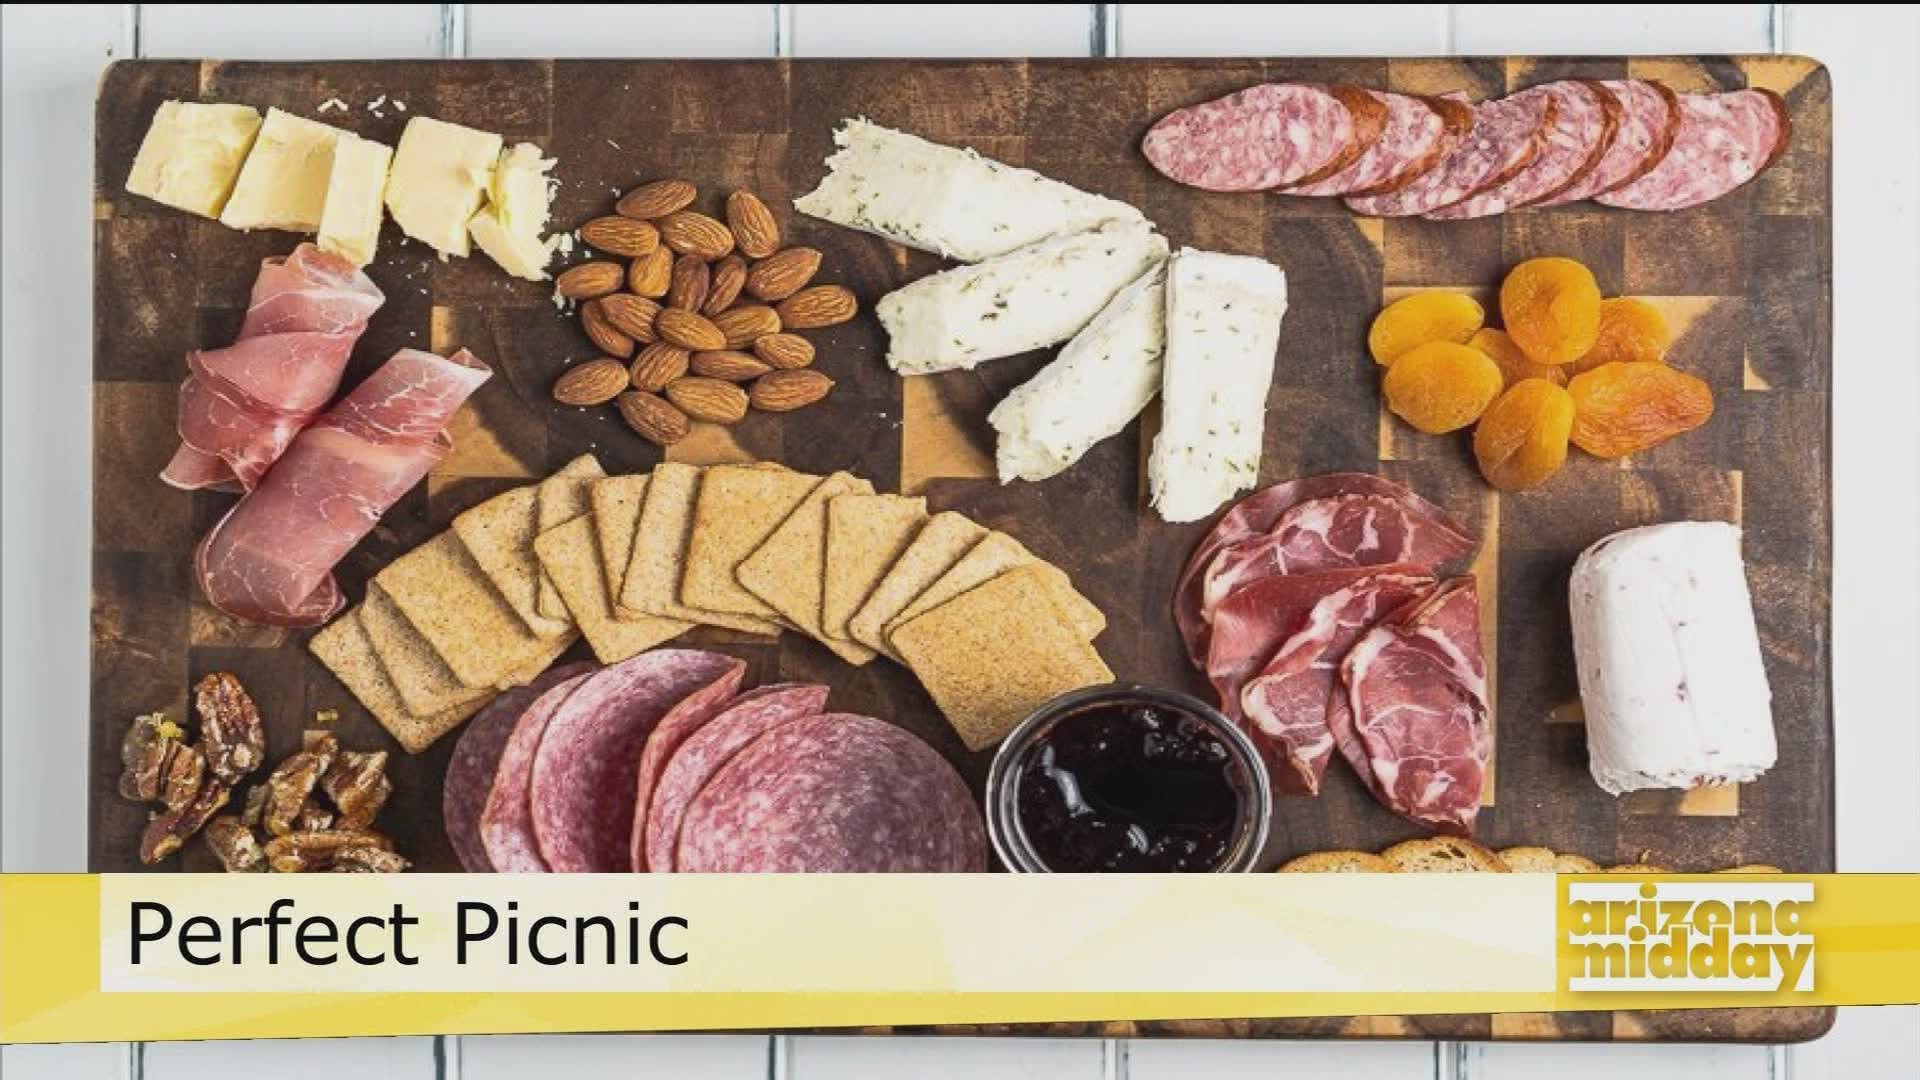 Calvin with Merkin Vineyards shows us how to pack the perfect picnic and how we don't even have to pack one if we stop by the vineyards!